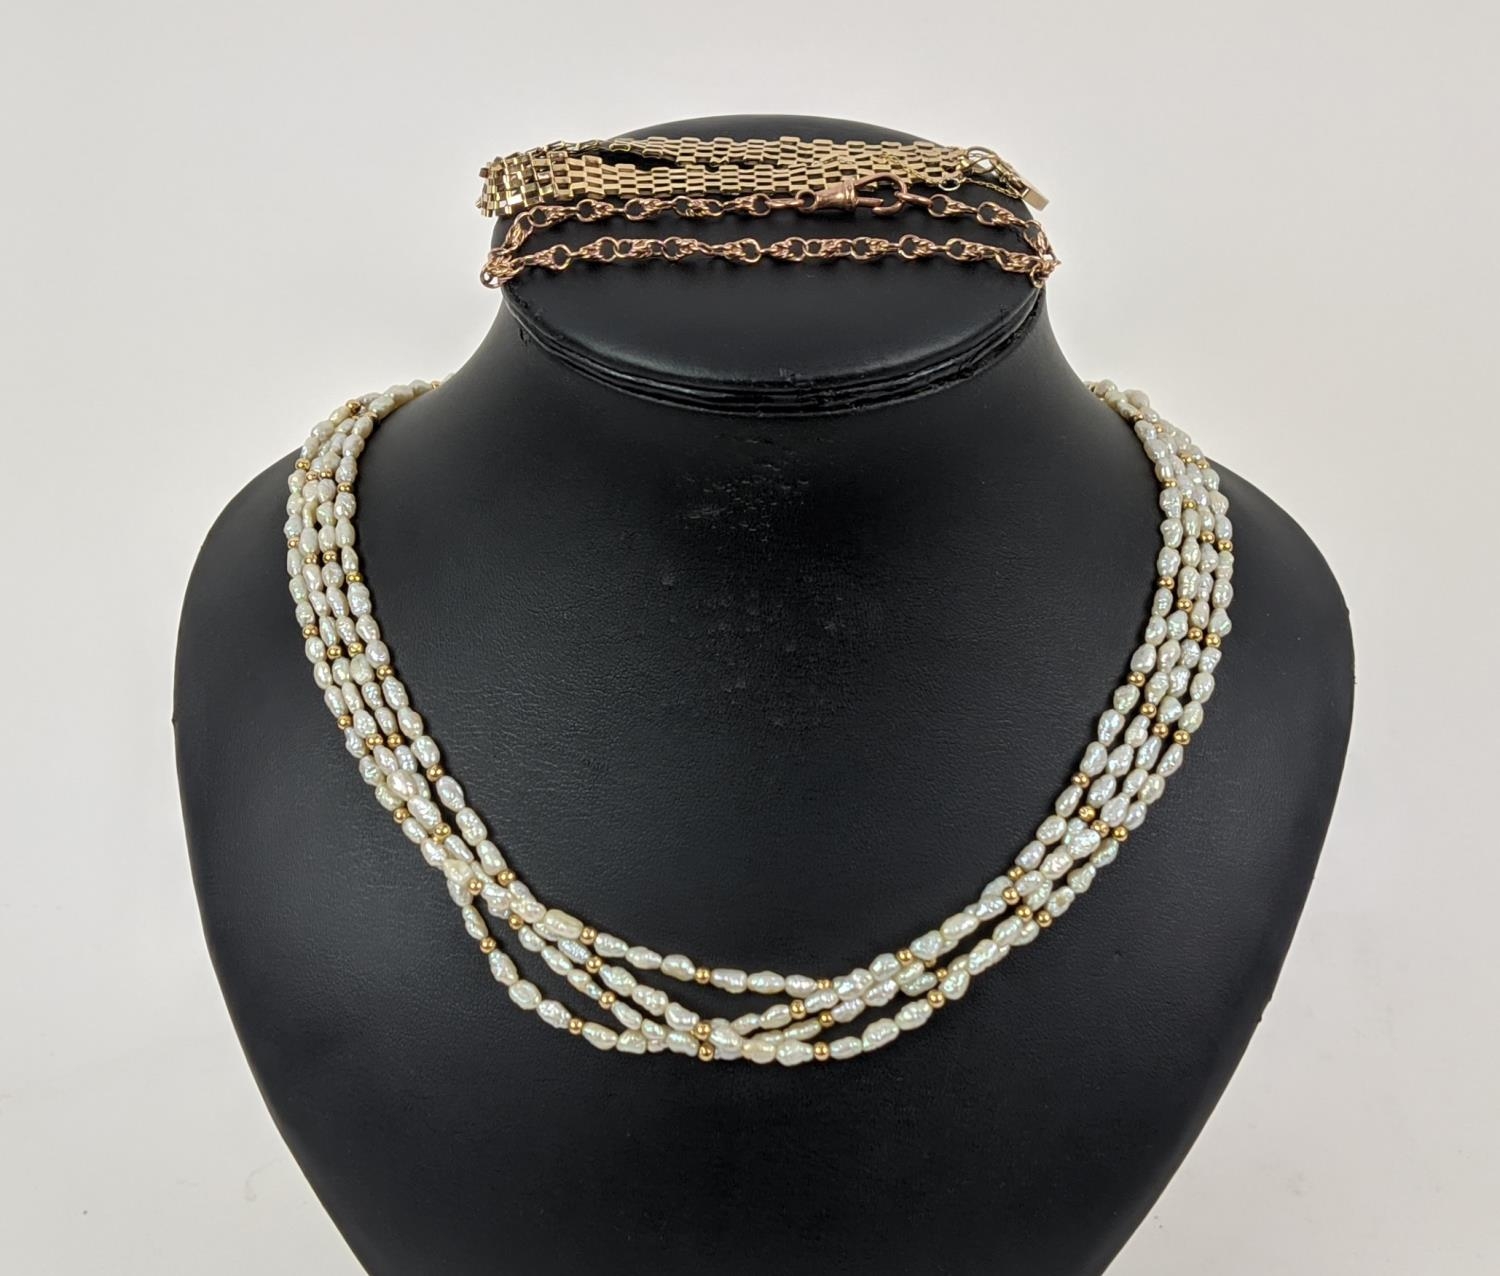 A FOUR STRAND RICE PEARL NECKLACE, with a gold ball clasp, a 9ct gold gatelink bracelet, etc